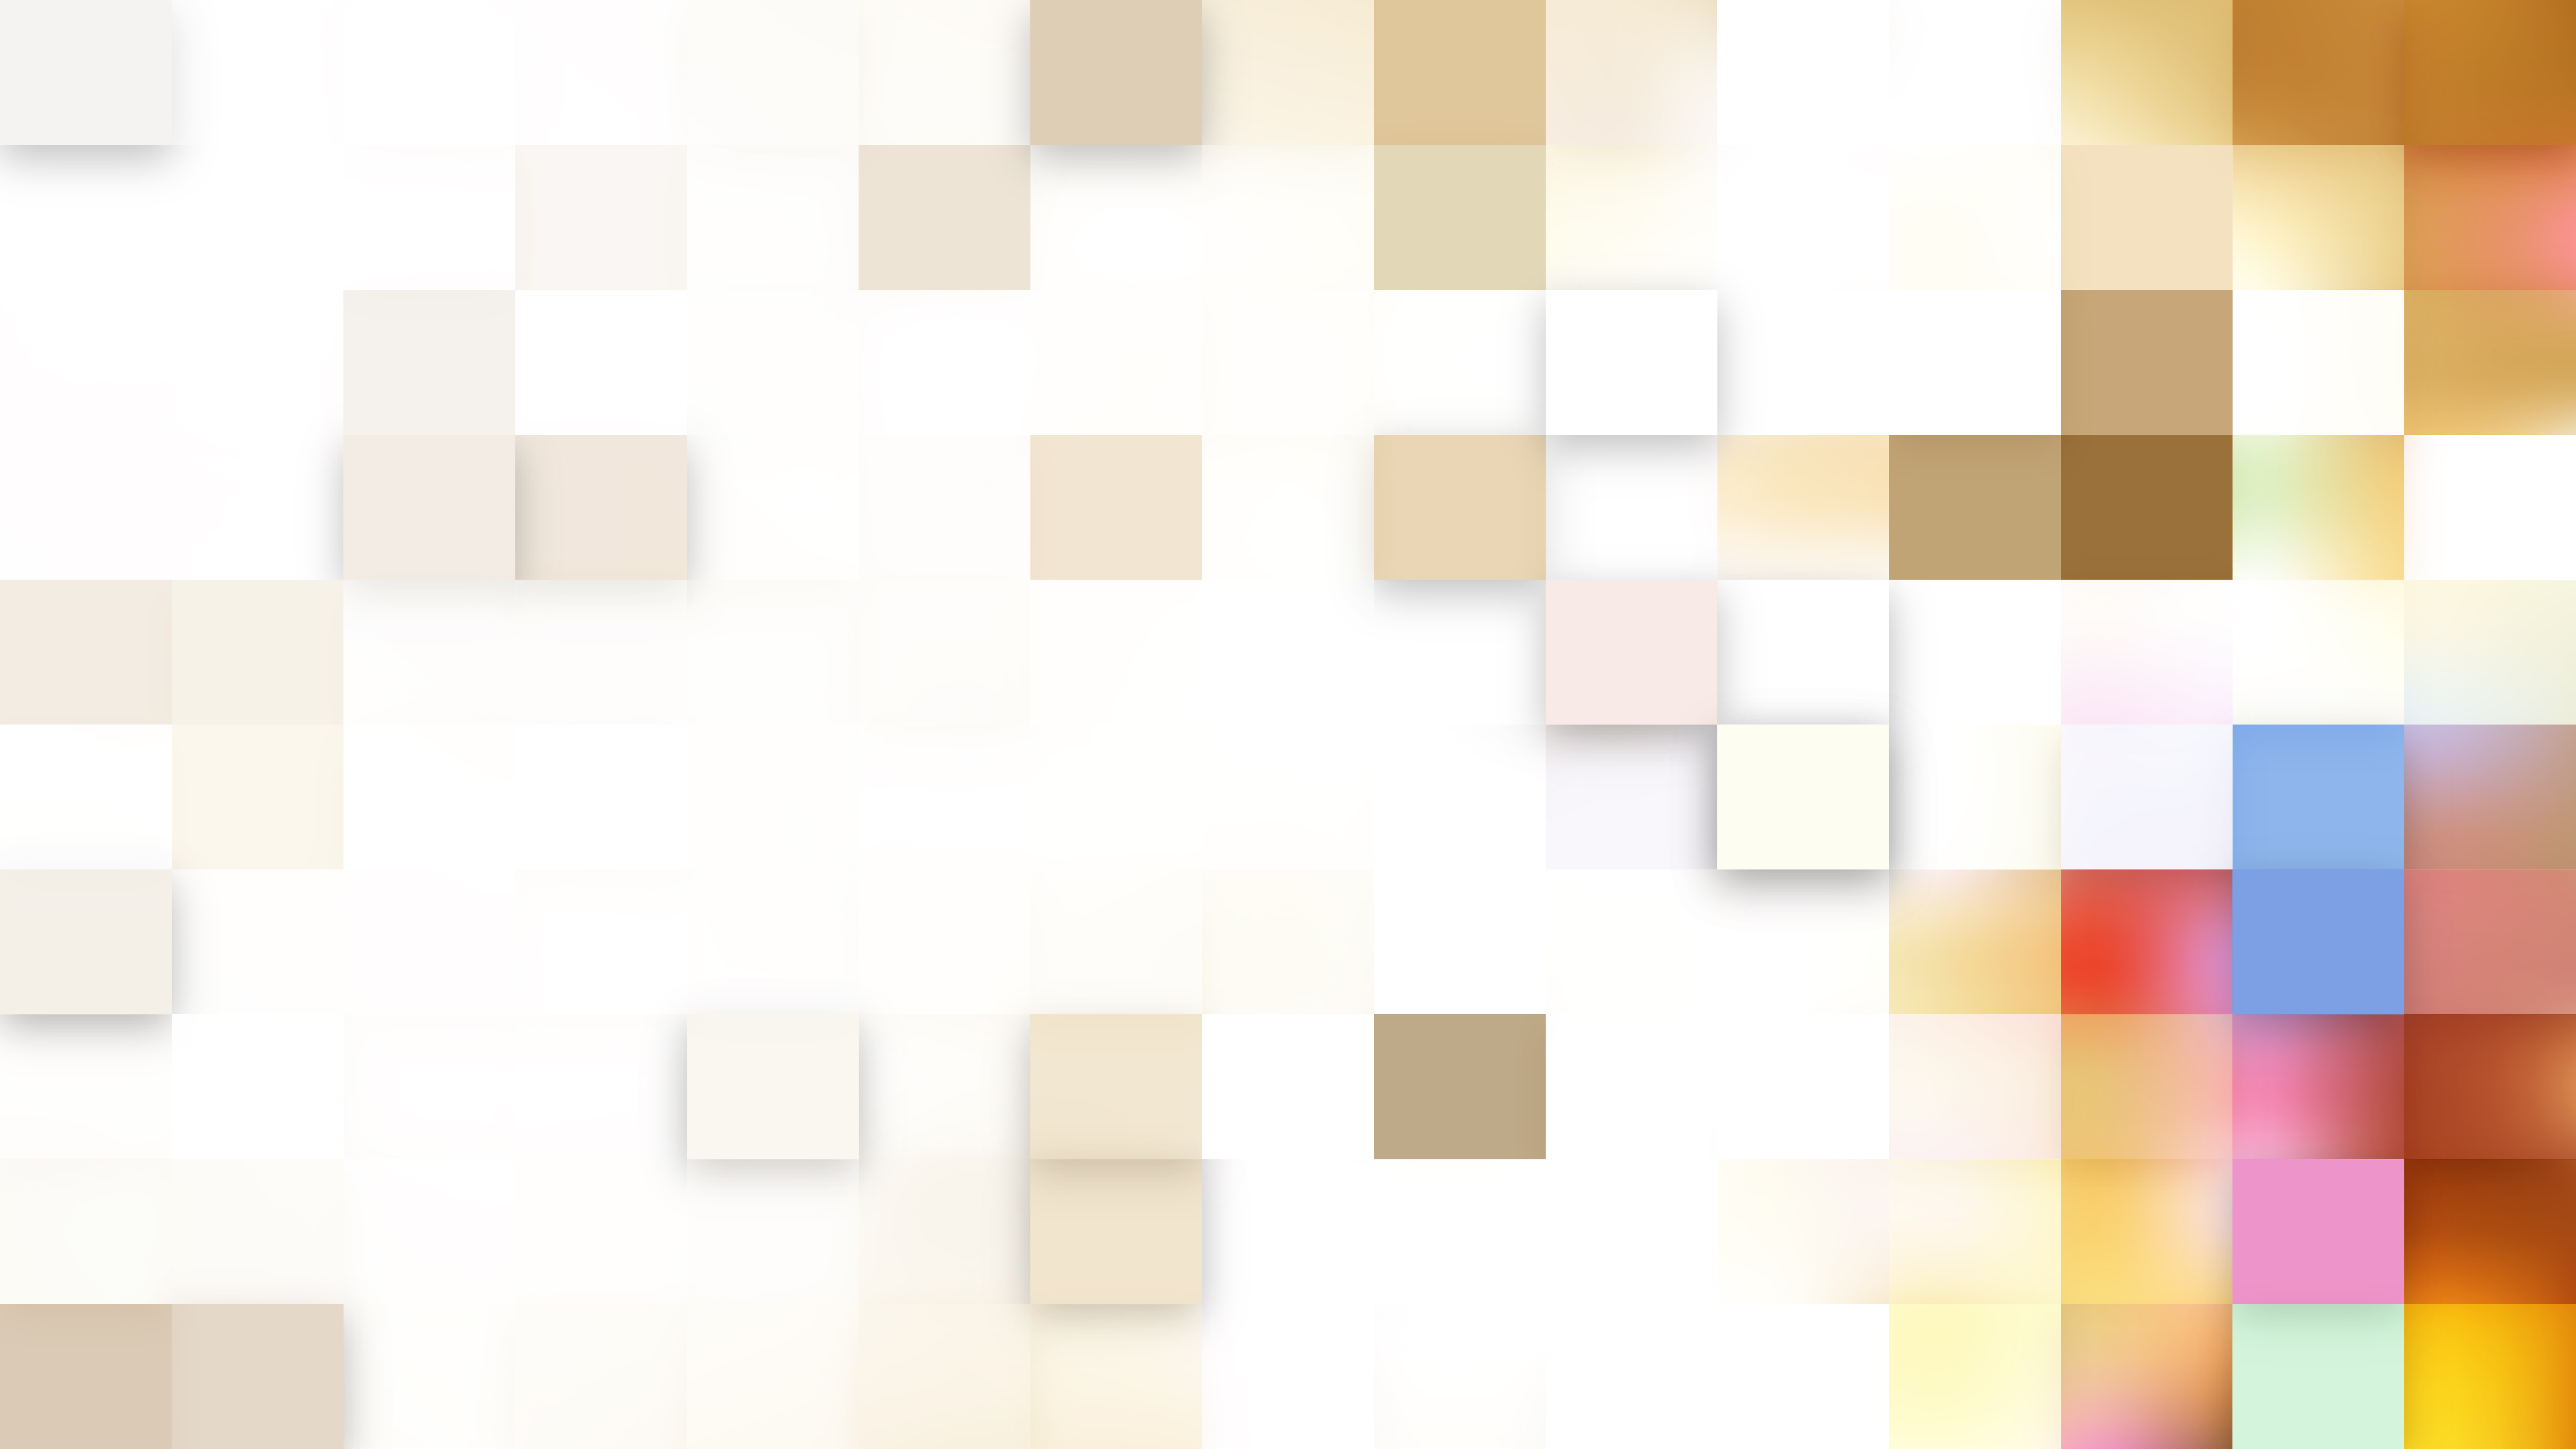 Abstract Light Color Square Mosaic Tile Background Image